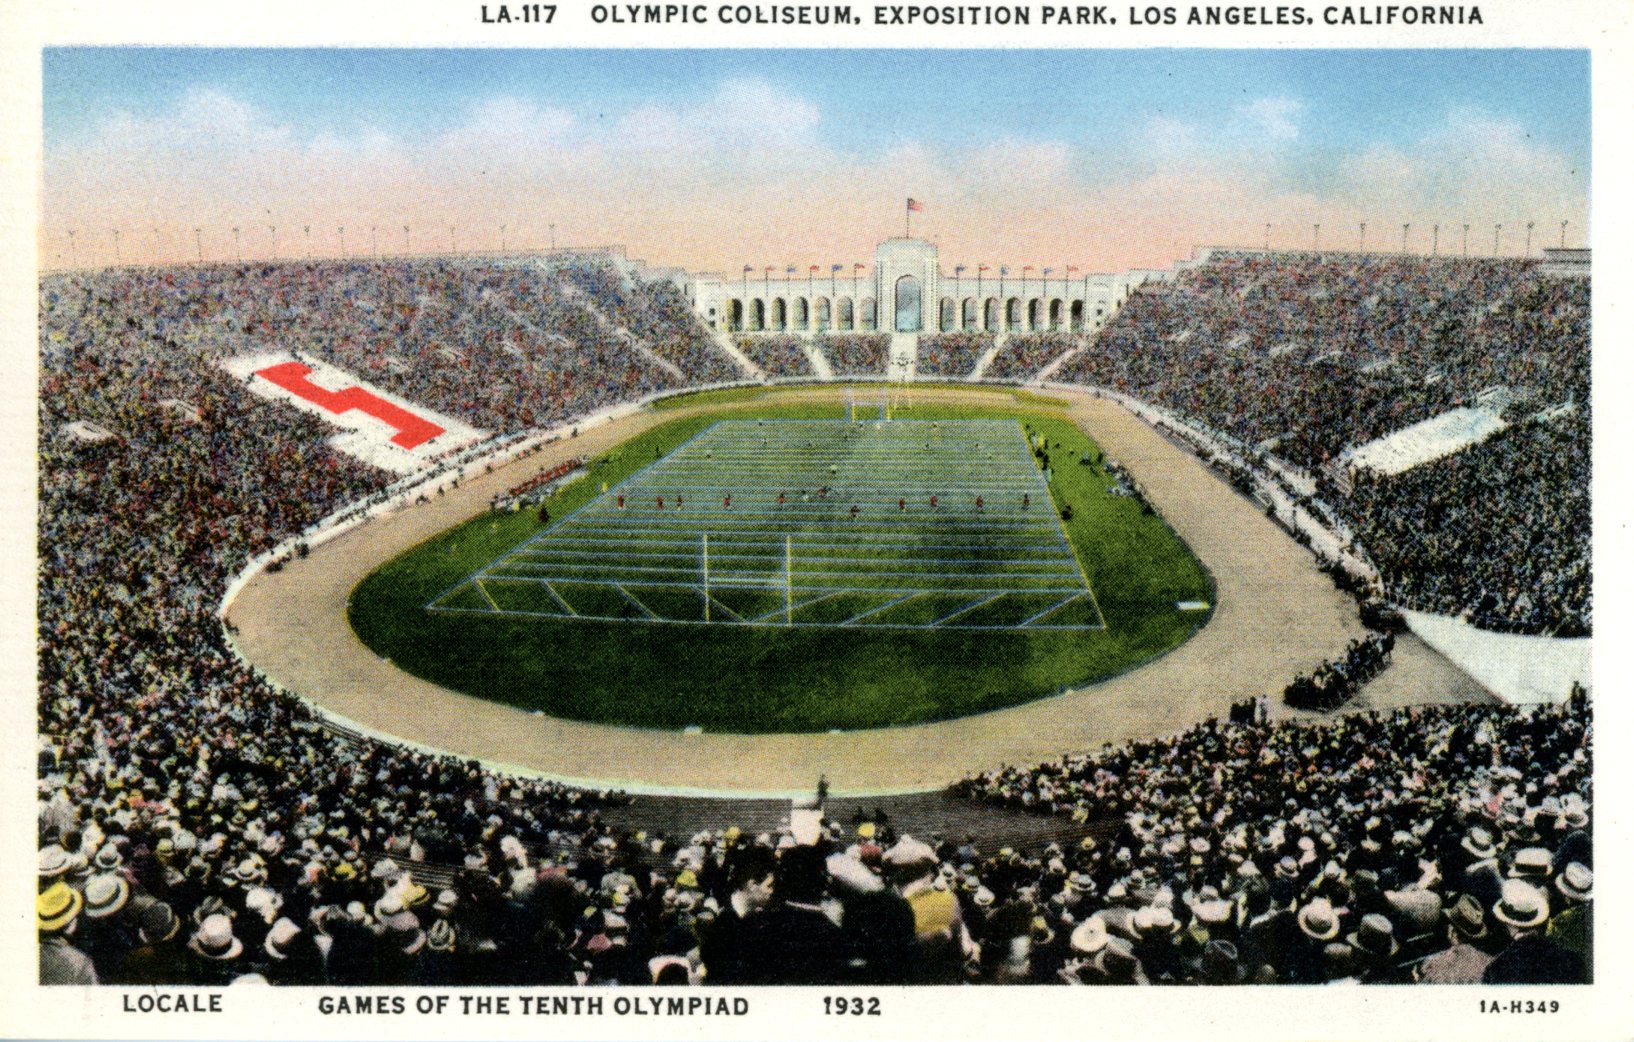 For Rams, Return to Los Angeles Coliseum Will Be a Spartan Affair ...